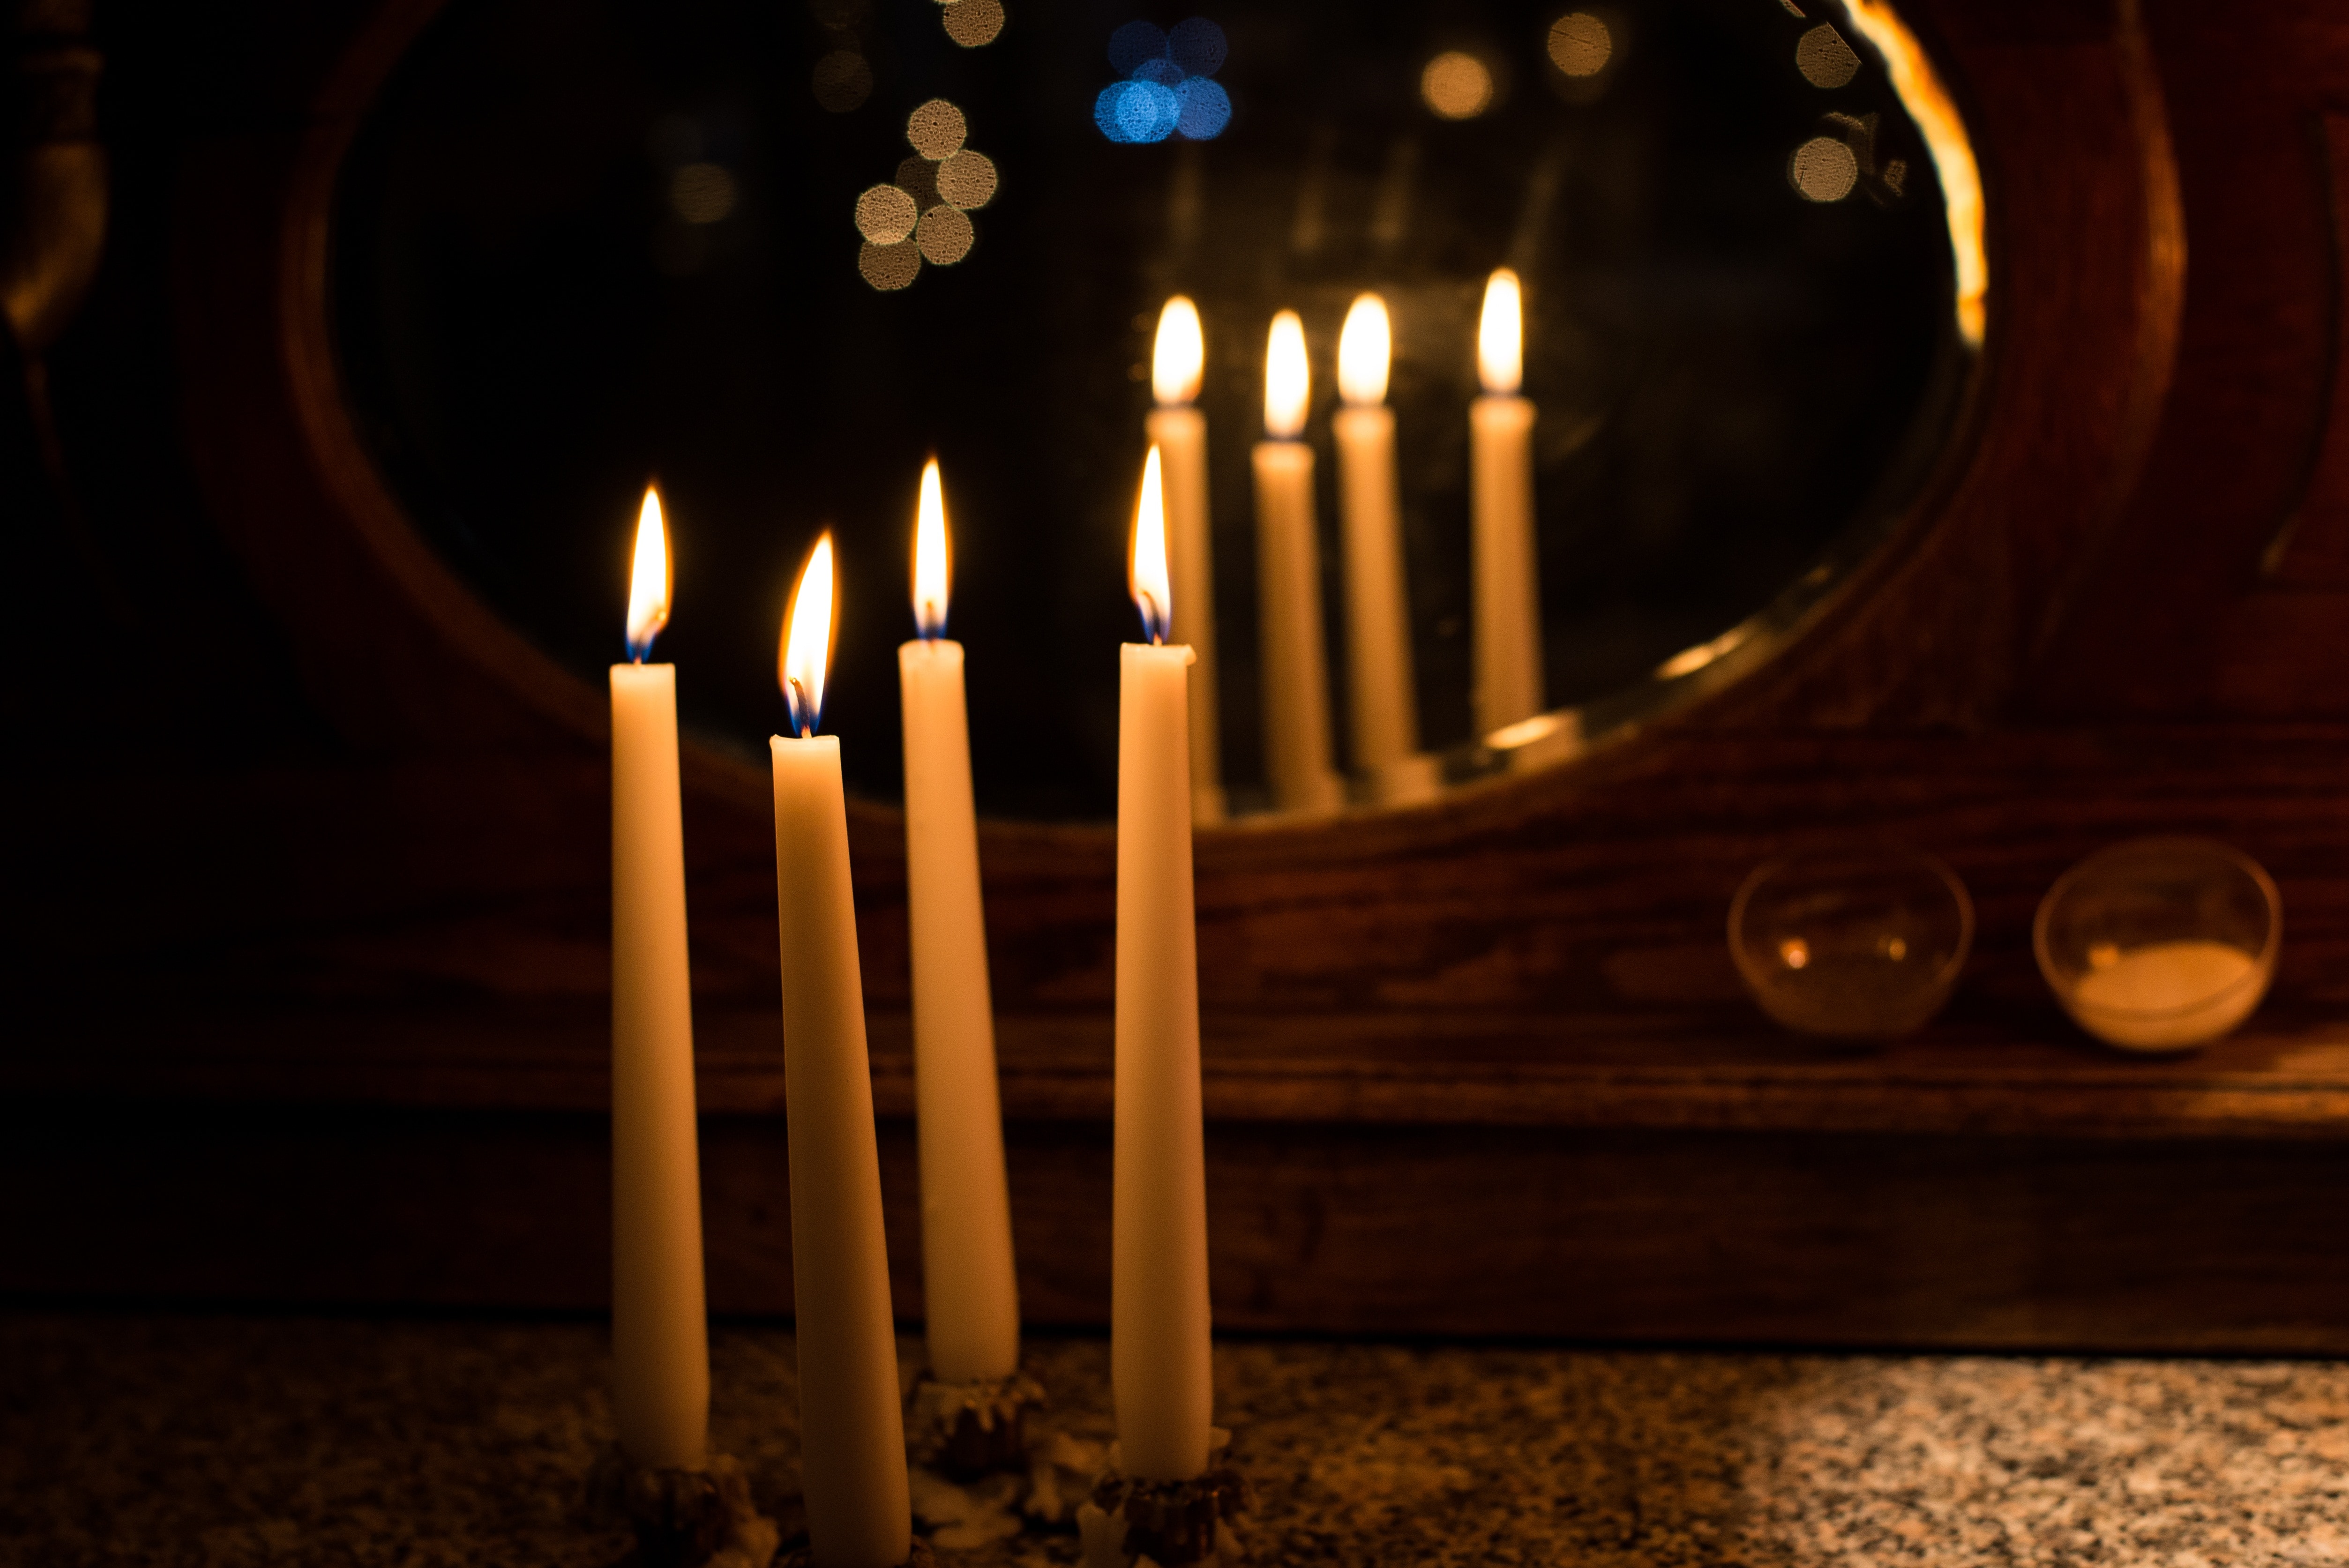 four lighted candles